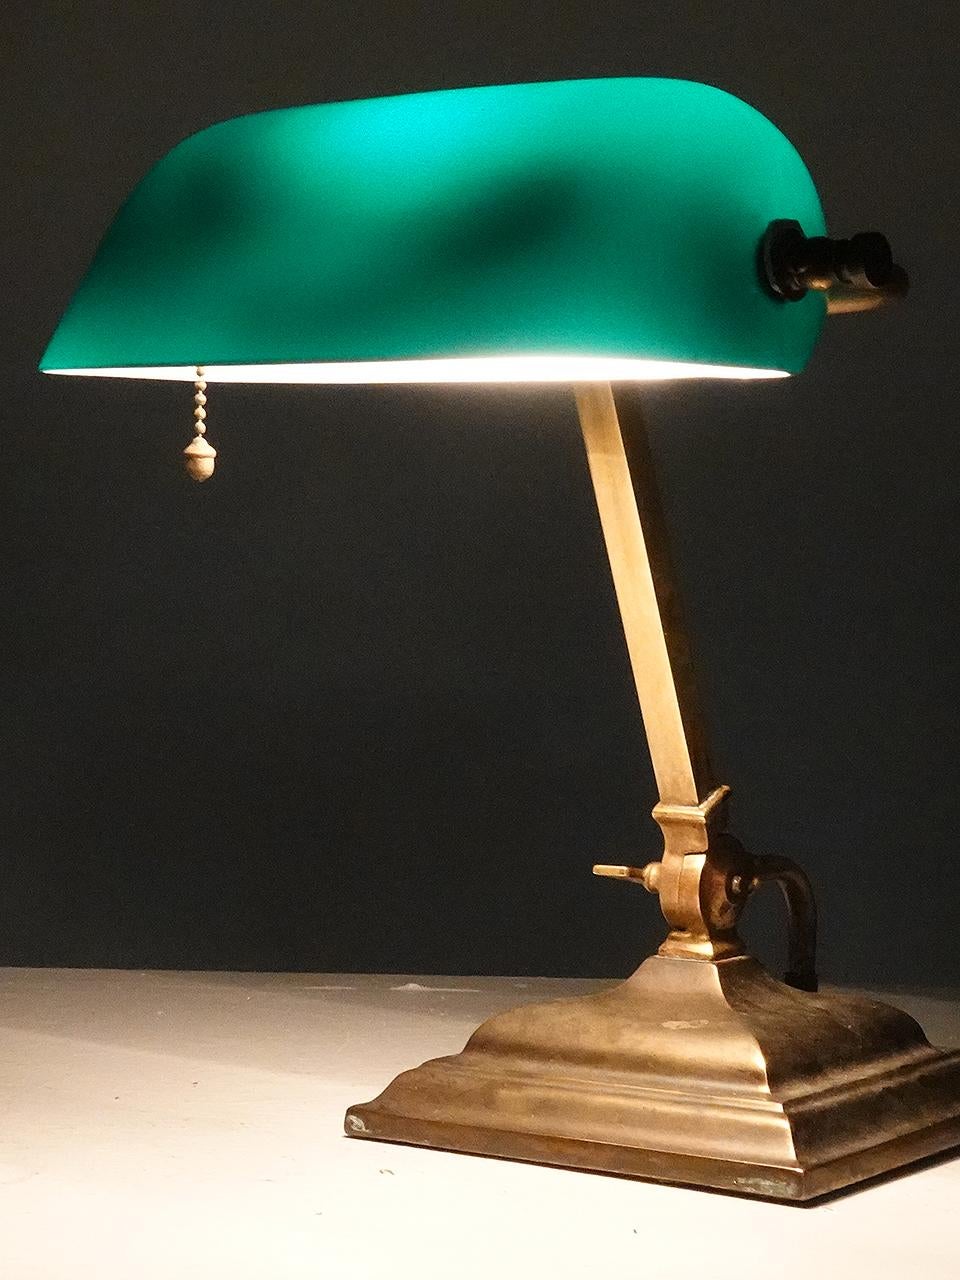 The lamp is unsigned but the glass tells me it must be a Verdelite. these lamps mostly date to the very early 20th century. This banker's desk lamp or piano lamp has an original emerald green blown glass shade.